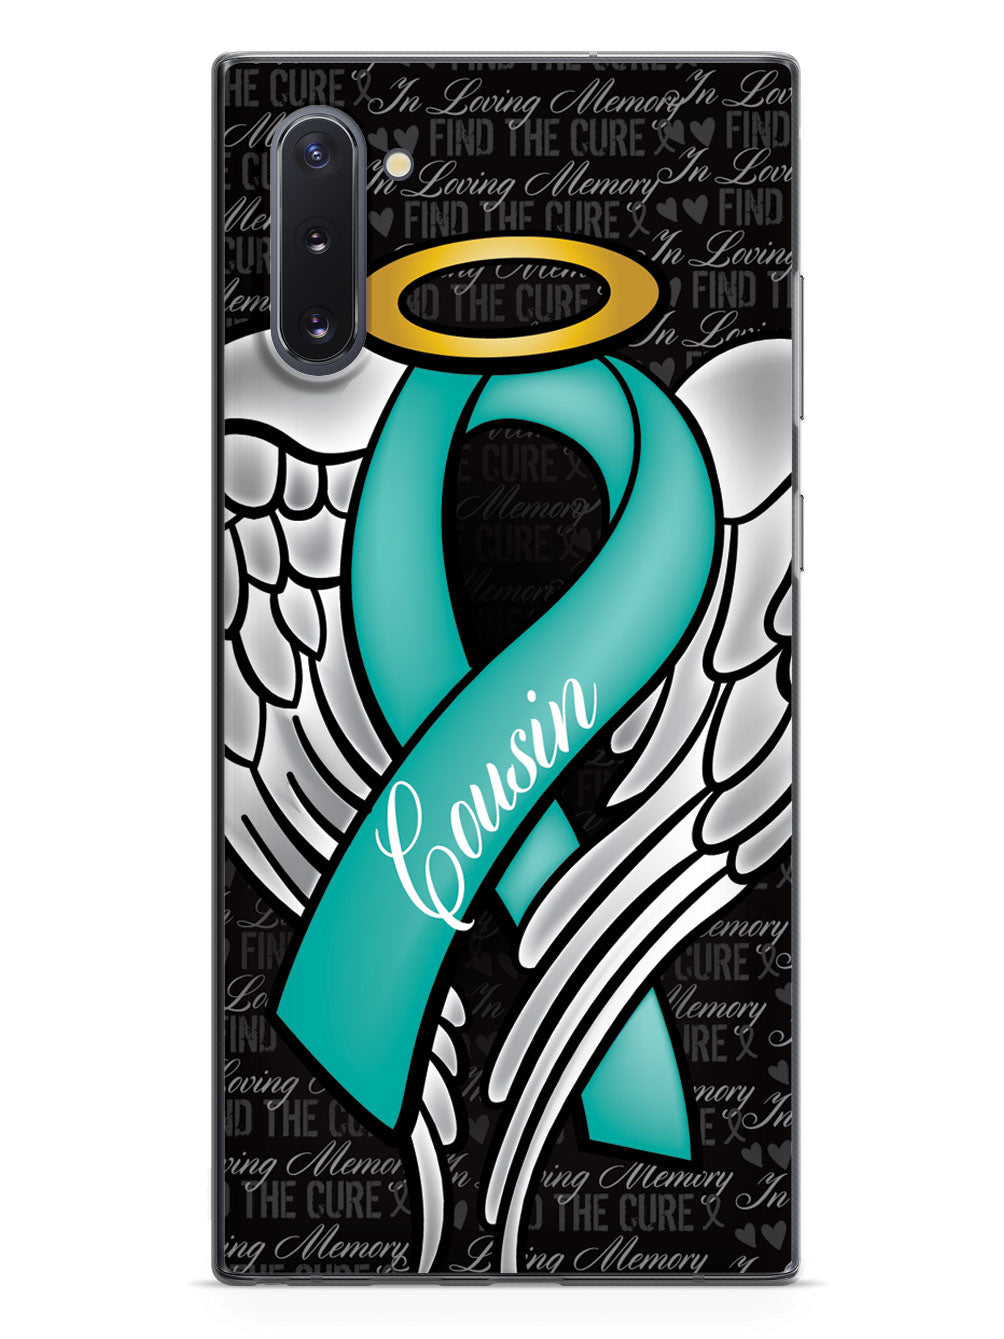 In Loving Memory of My Cousin - Teal Ribbon Case